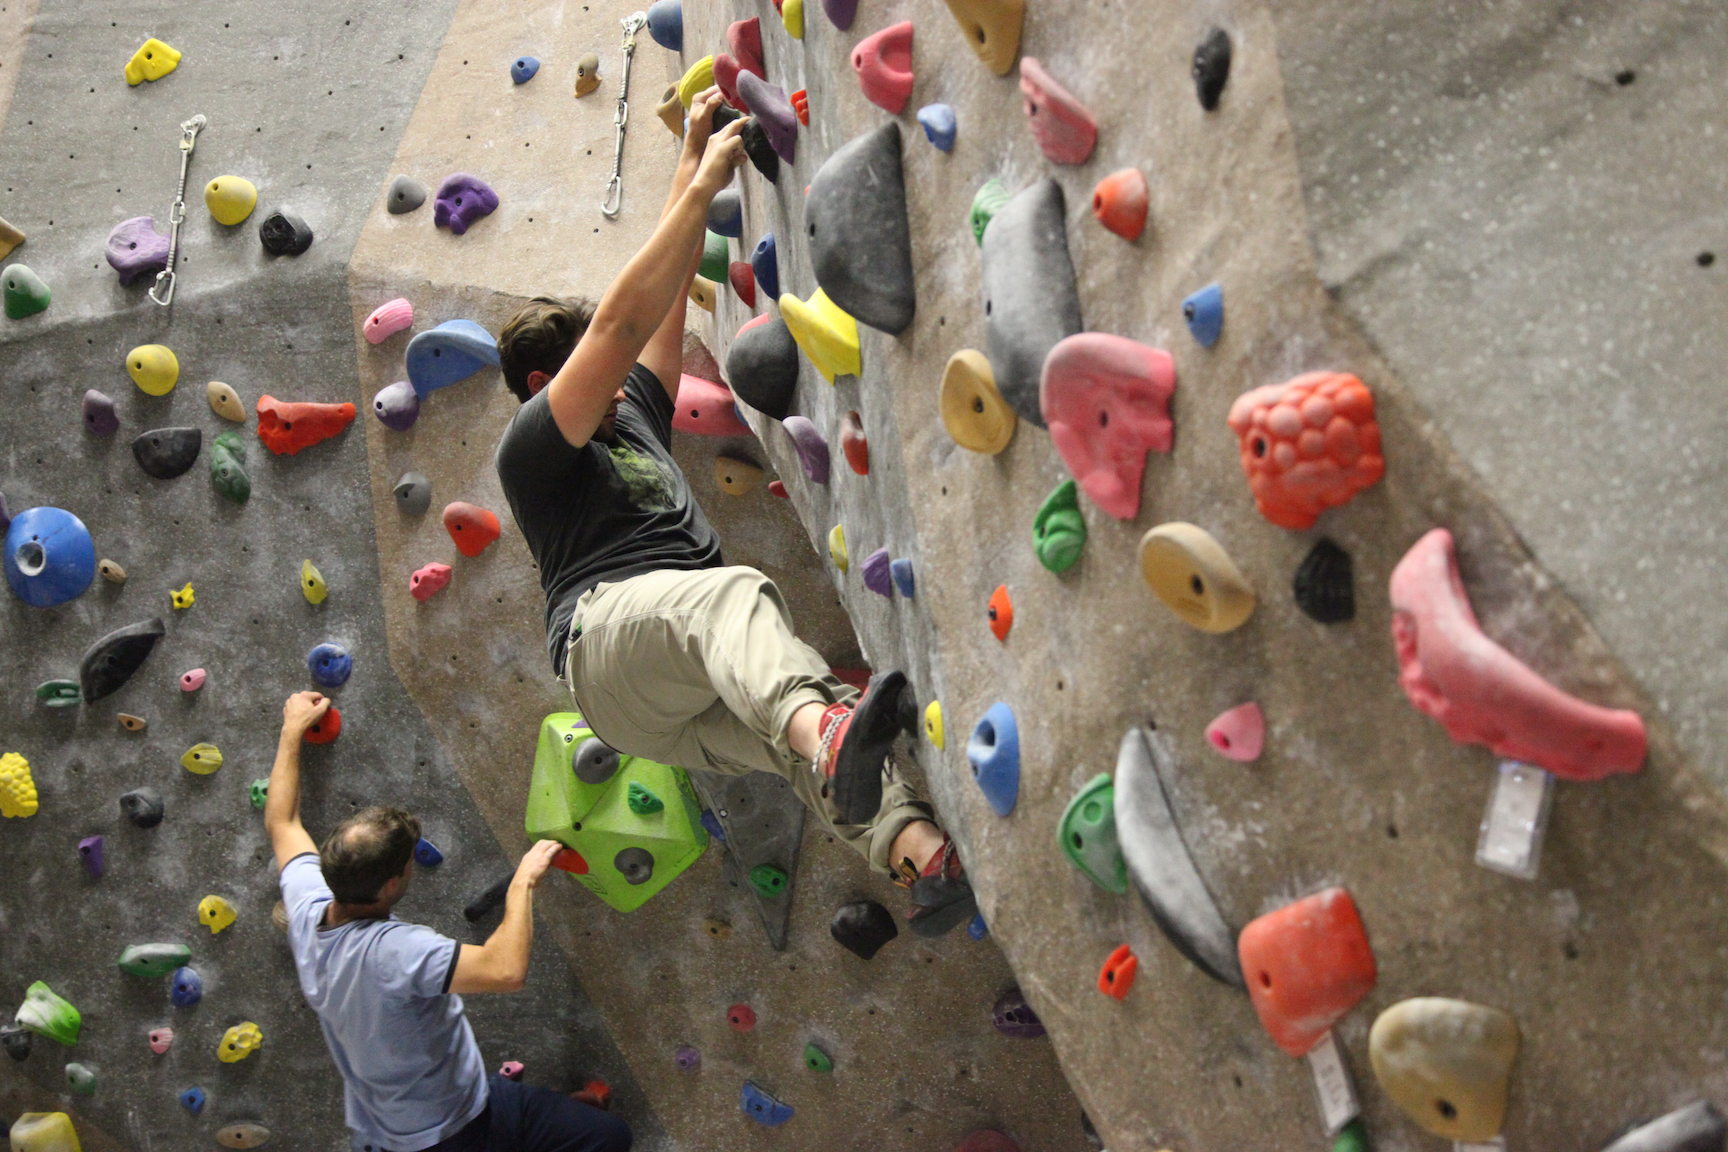 Rock climbing at the Outdoor Adventure Center is an option for weekly Social Adventurers Meetup events. [phoot taken prior to COVID-19 pandemic]